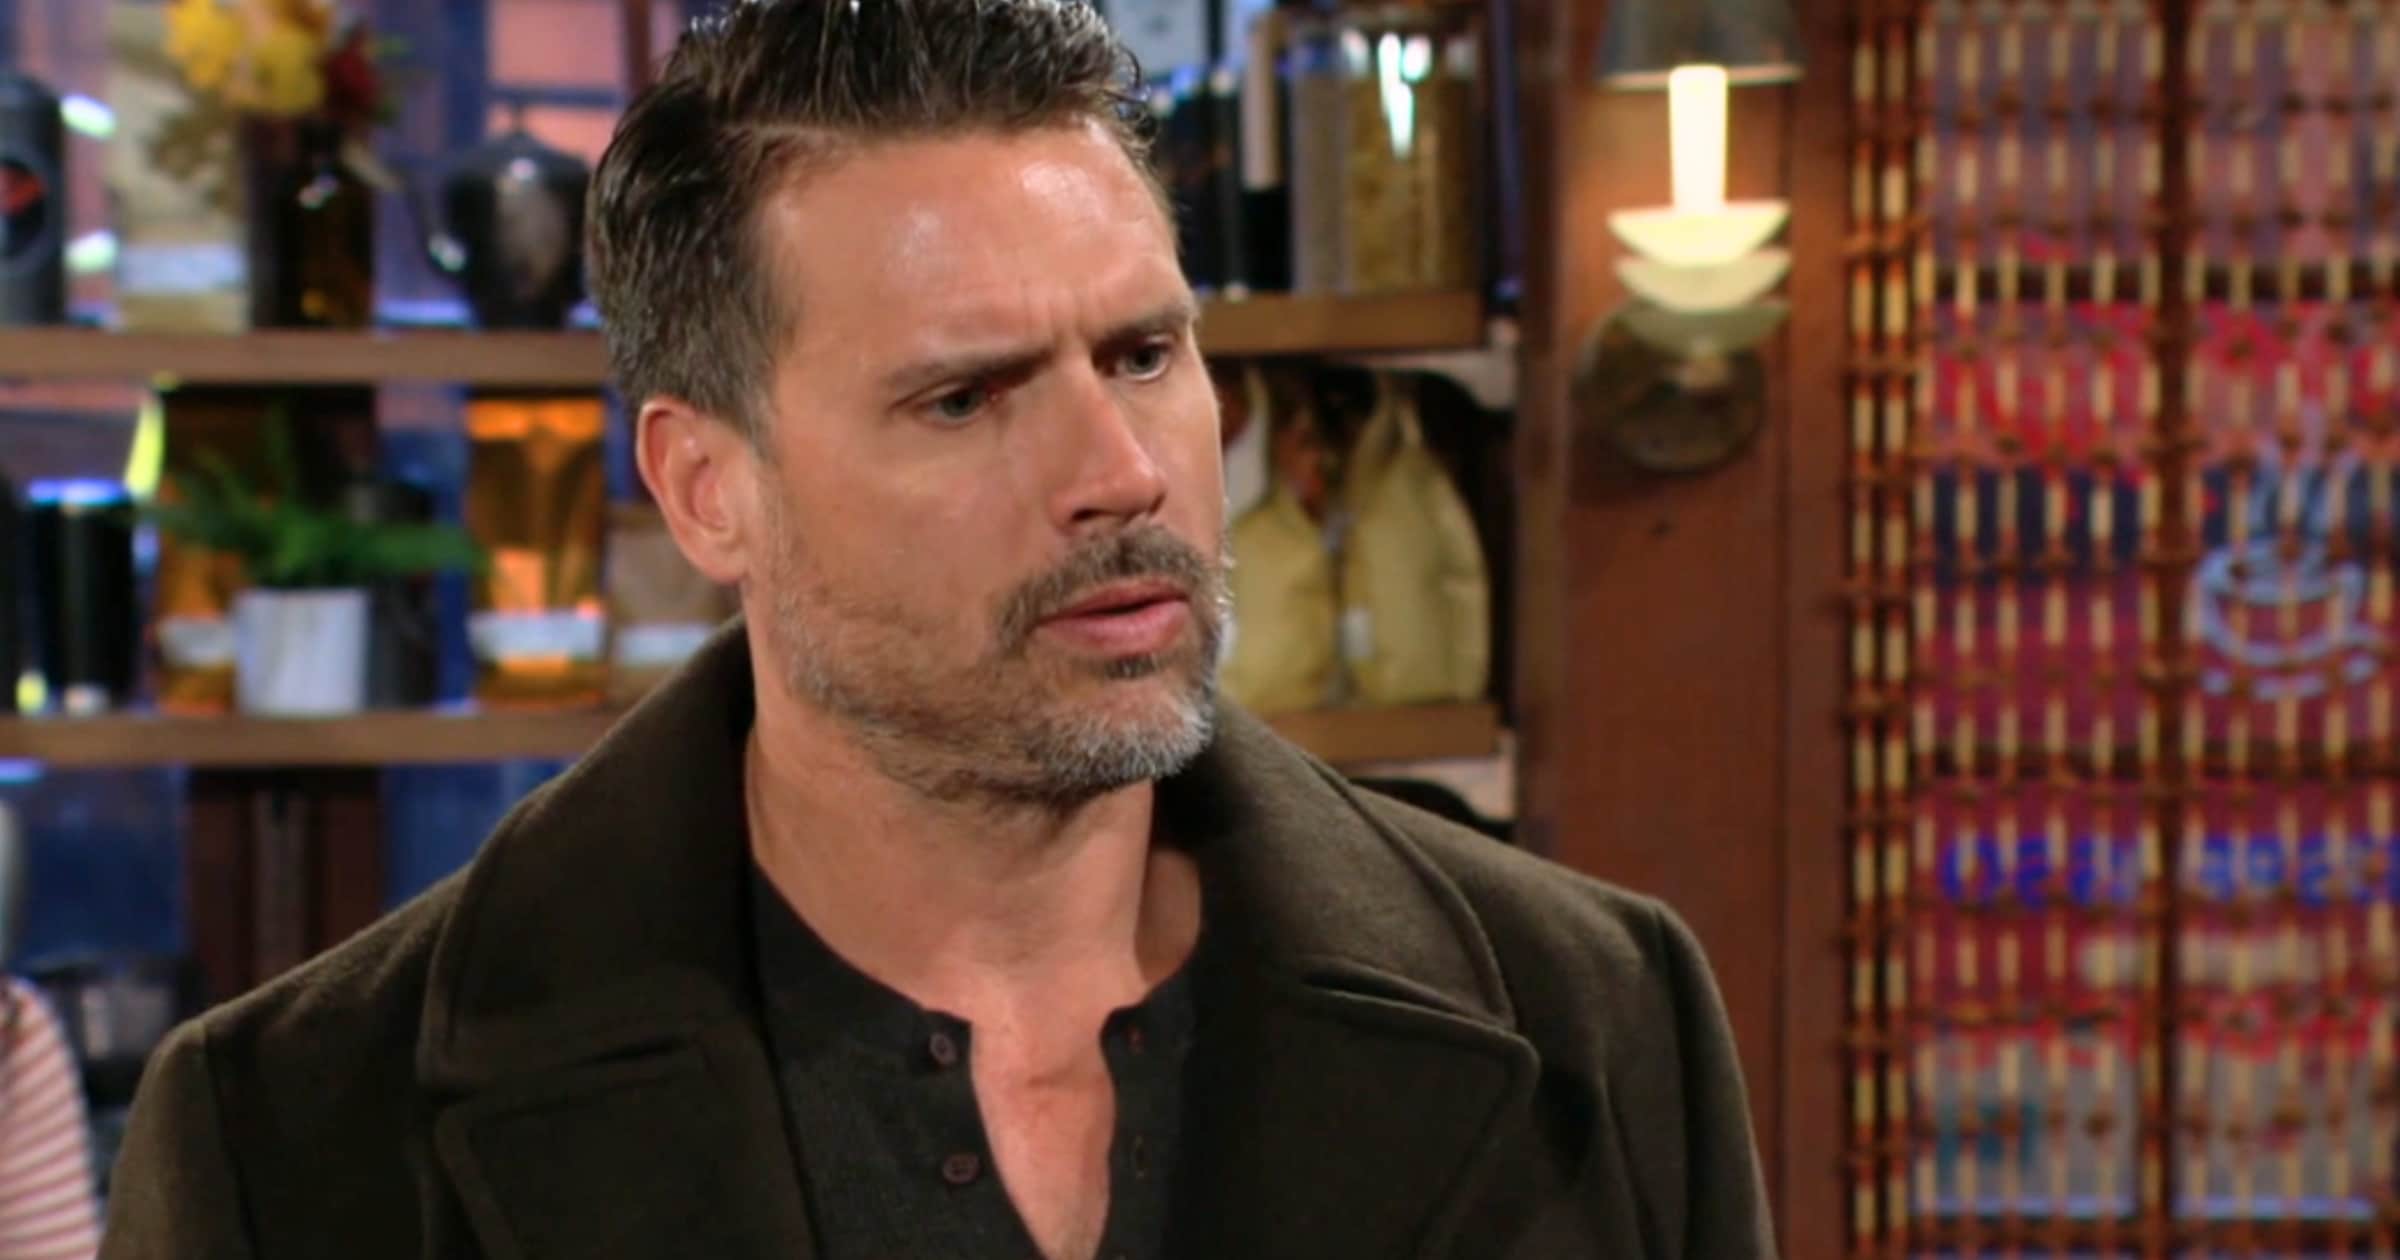 The Young and the Restless - Nov 13 - Nick